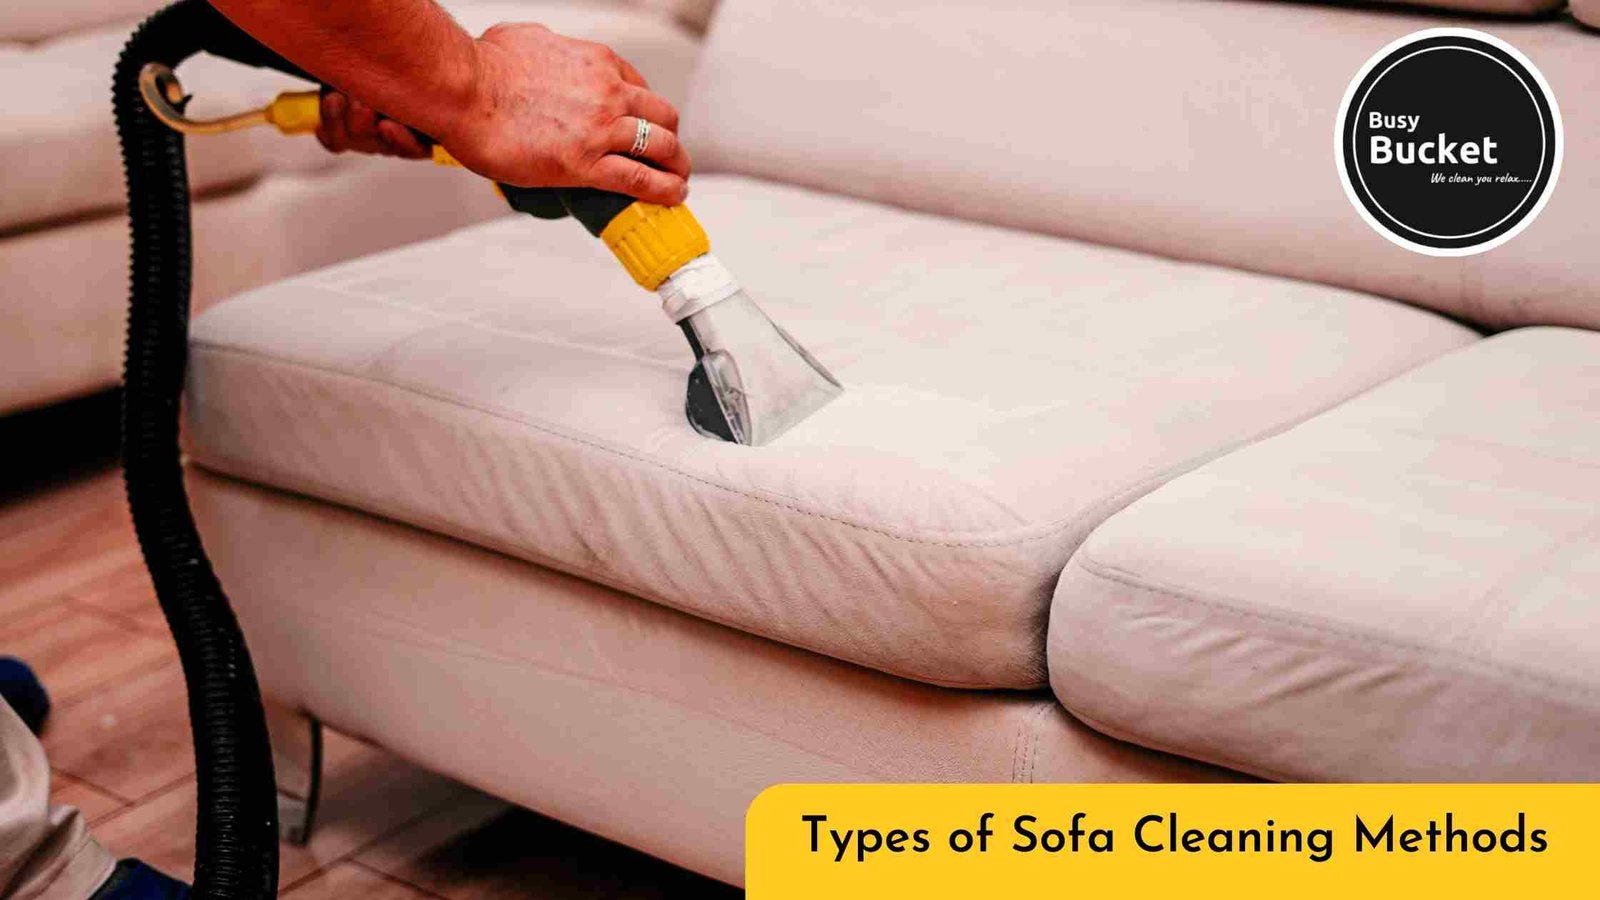 Types of Sofa Cleaning Methods